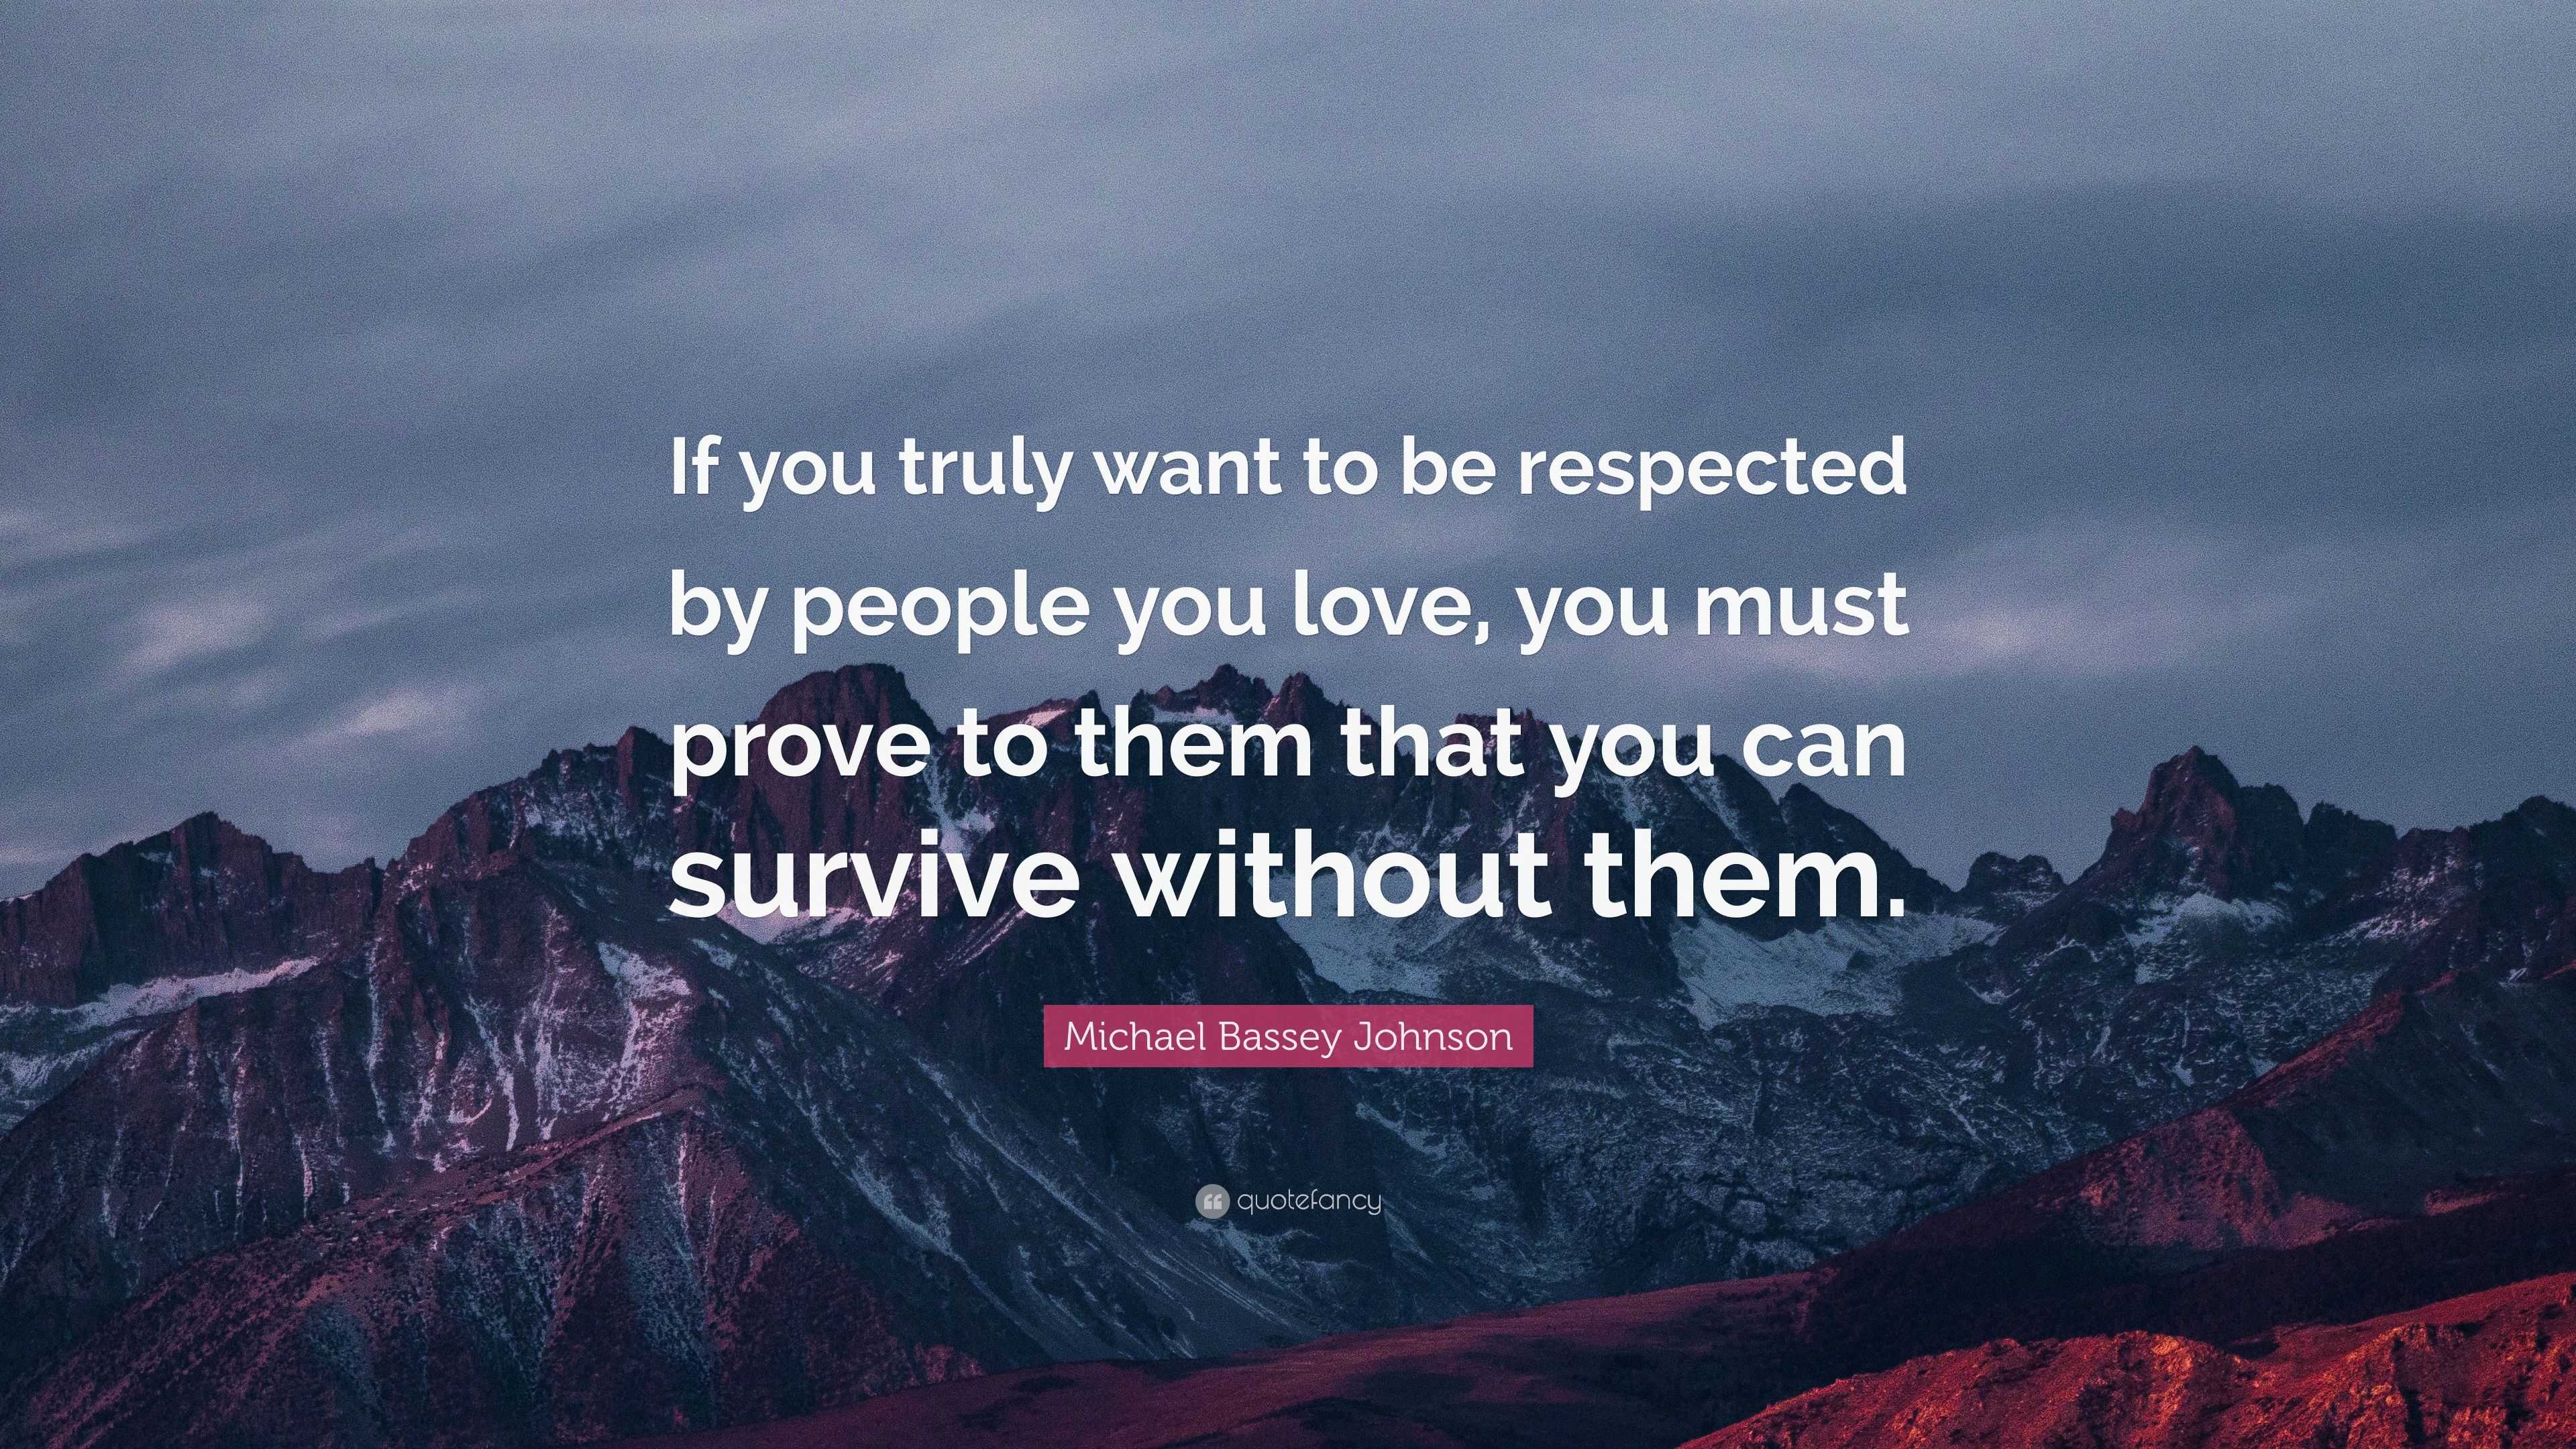 Michael Bassey Johnson Quote: “If you truly want to be respected by ...